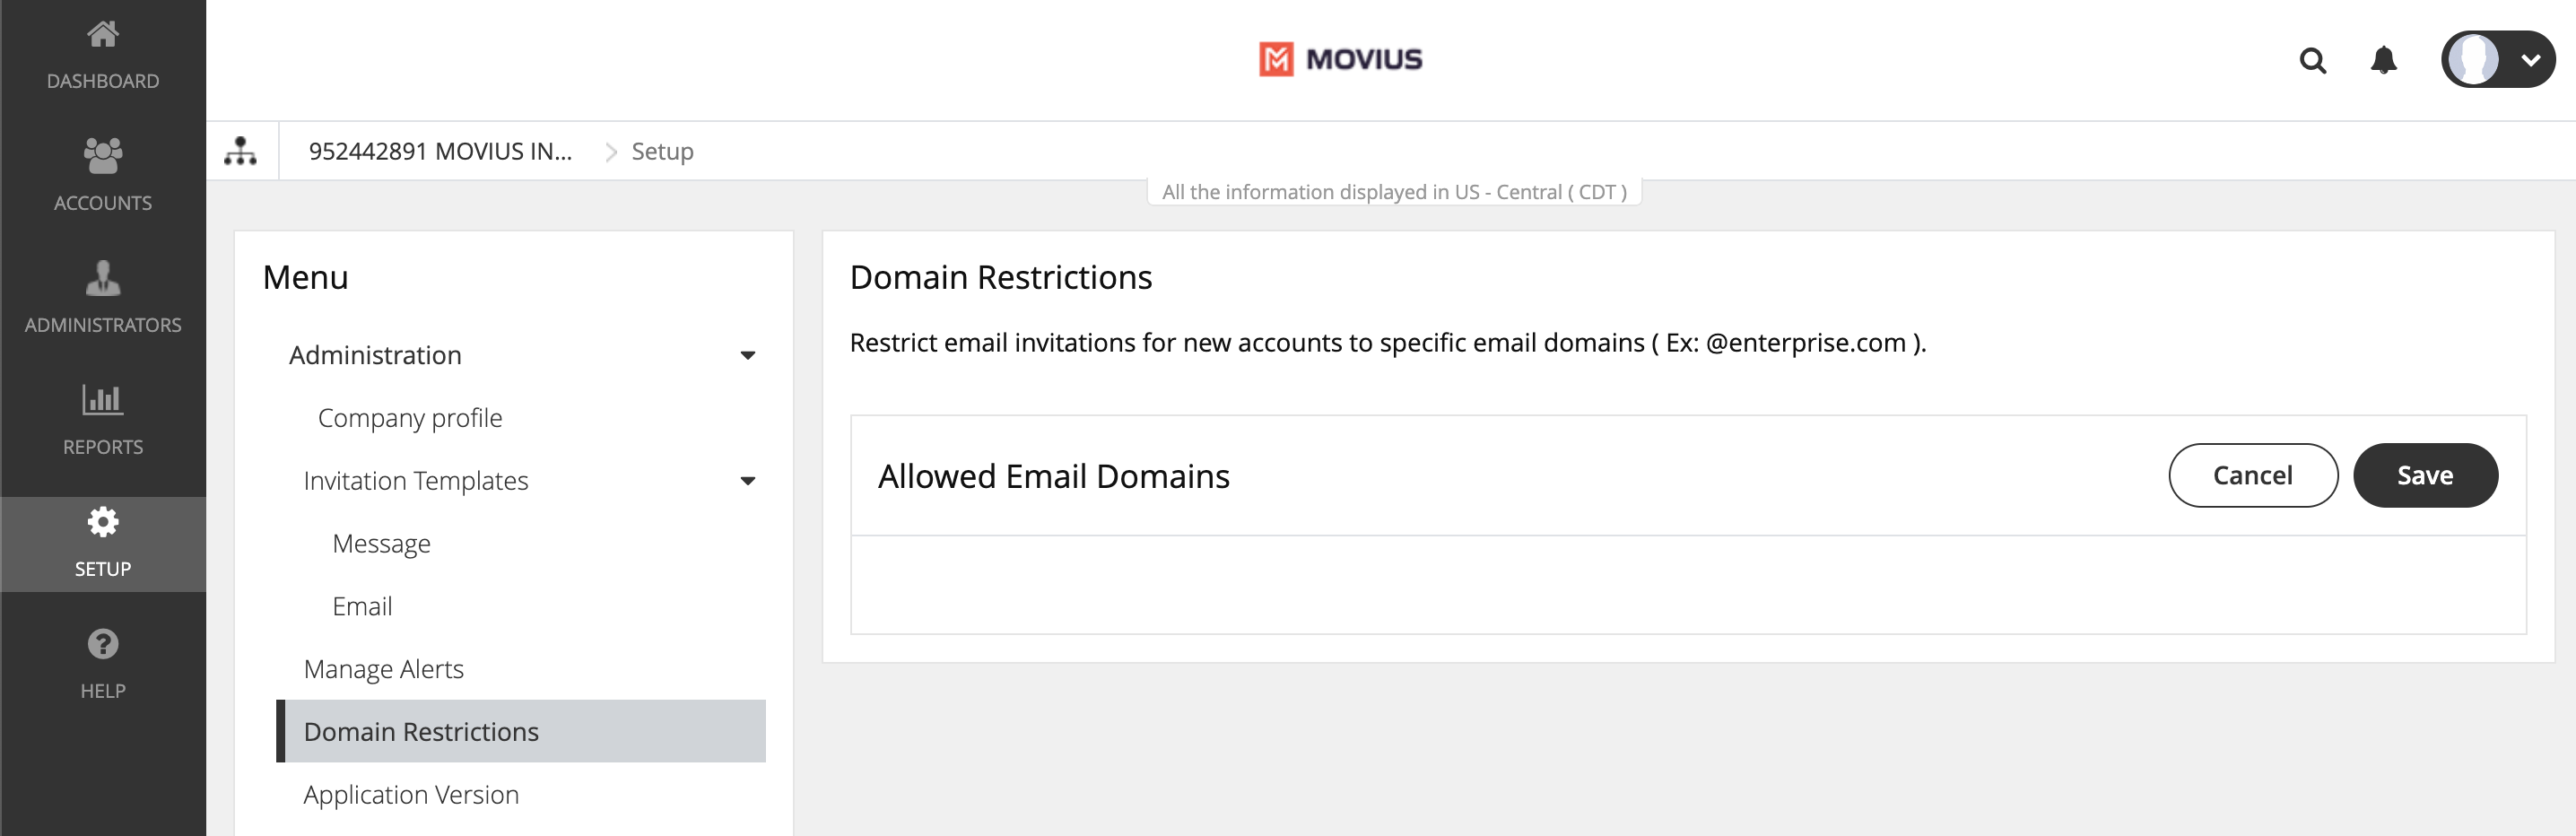 Allowed Email Domains screen